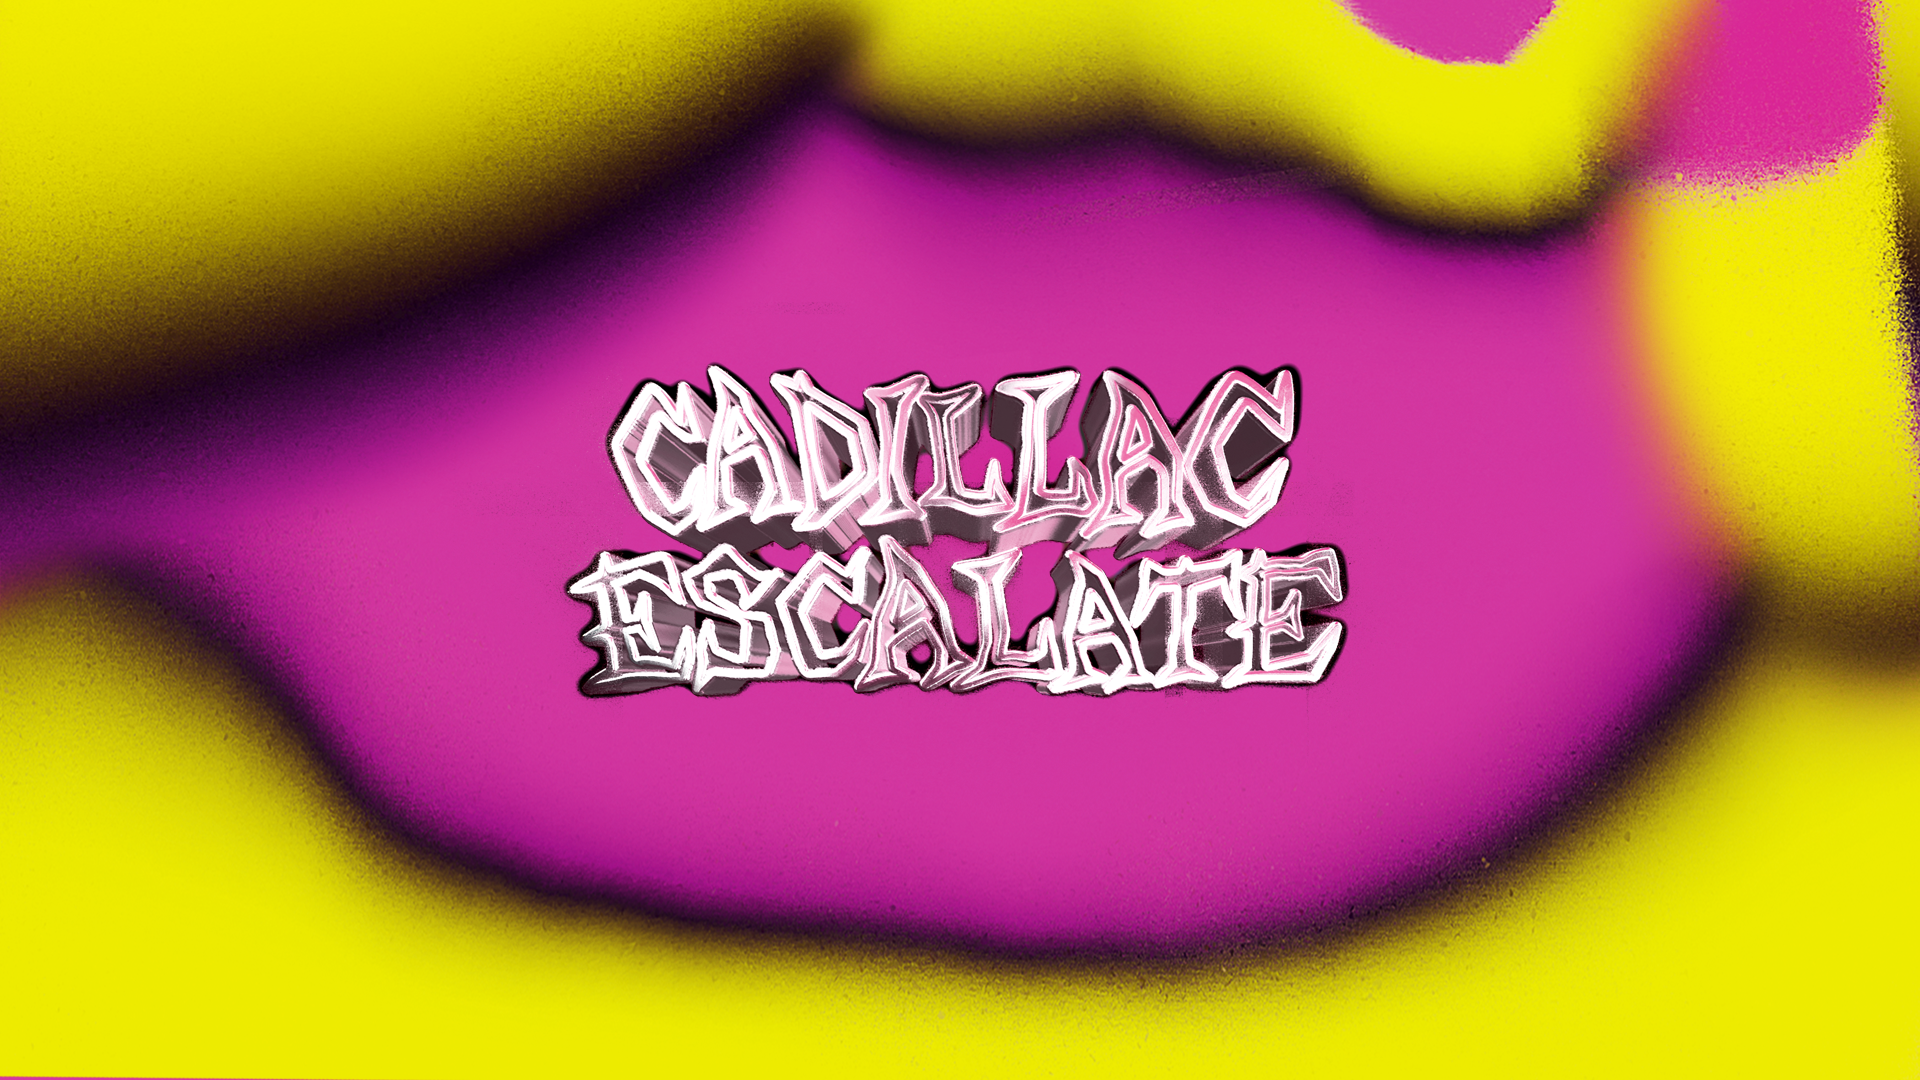 Cadillac Escalate with Juicy Romance, Carly Zeng, Cleo SNK, Zips, Supergloss + Residents - Página frontal